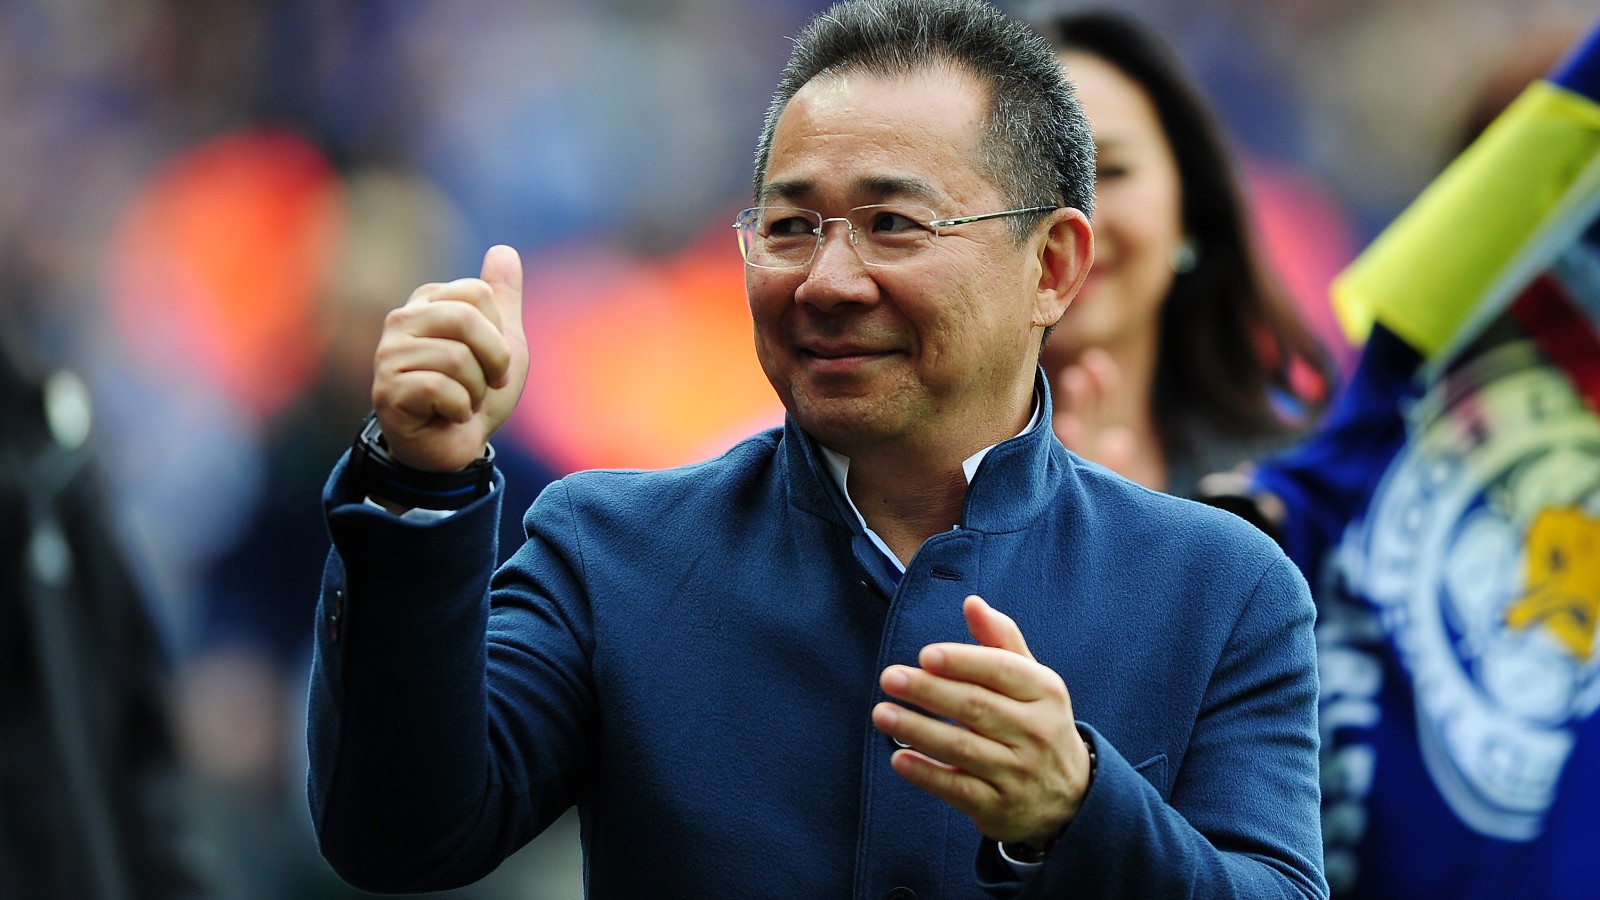 Vichai Srivaddhanaprabha, Leicester City owner and retail magnate, dies at 60